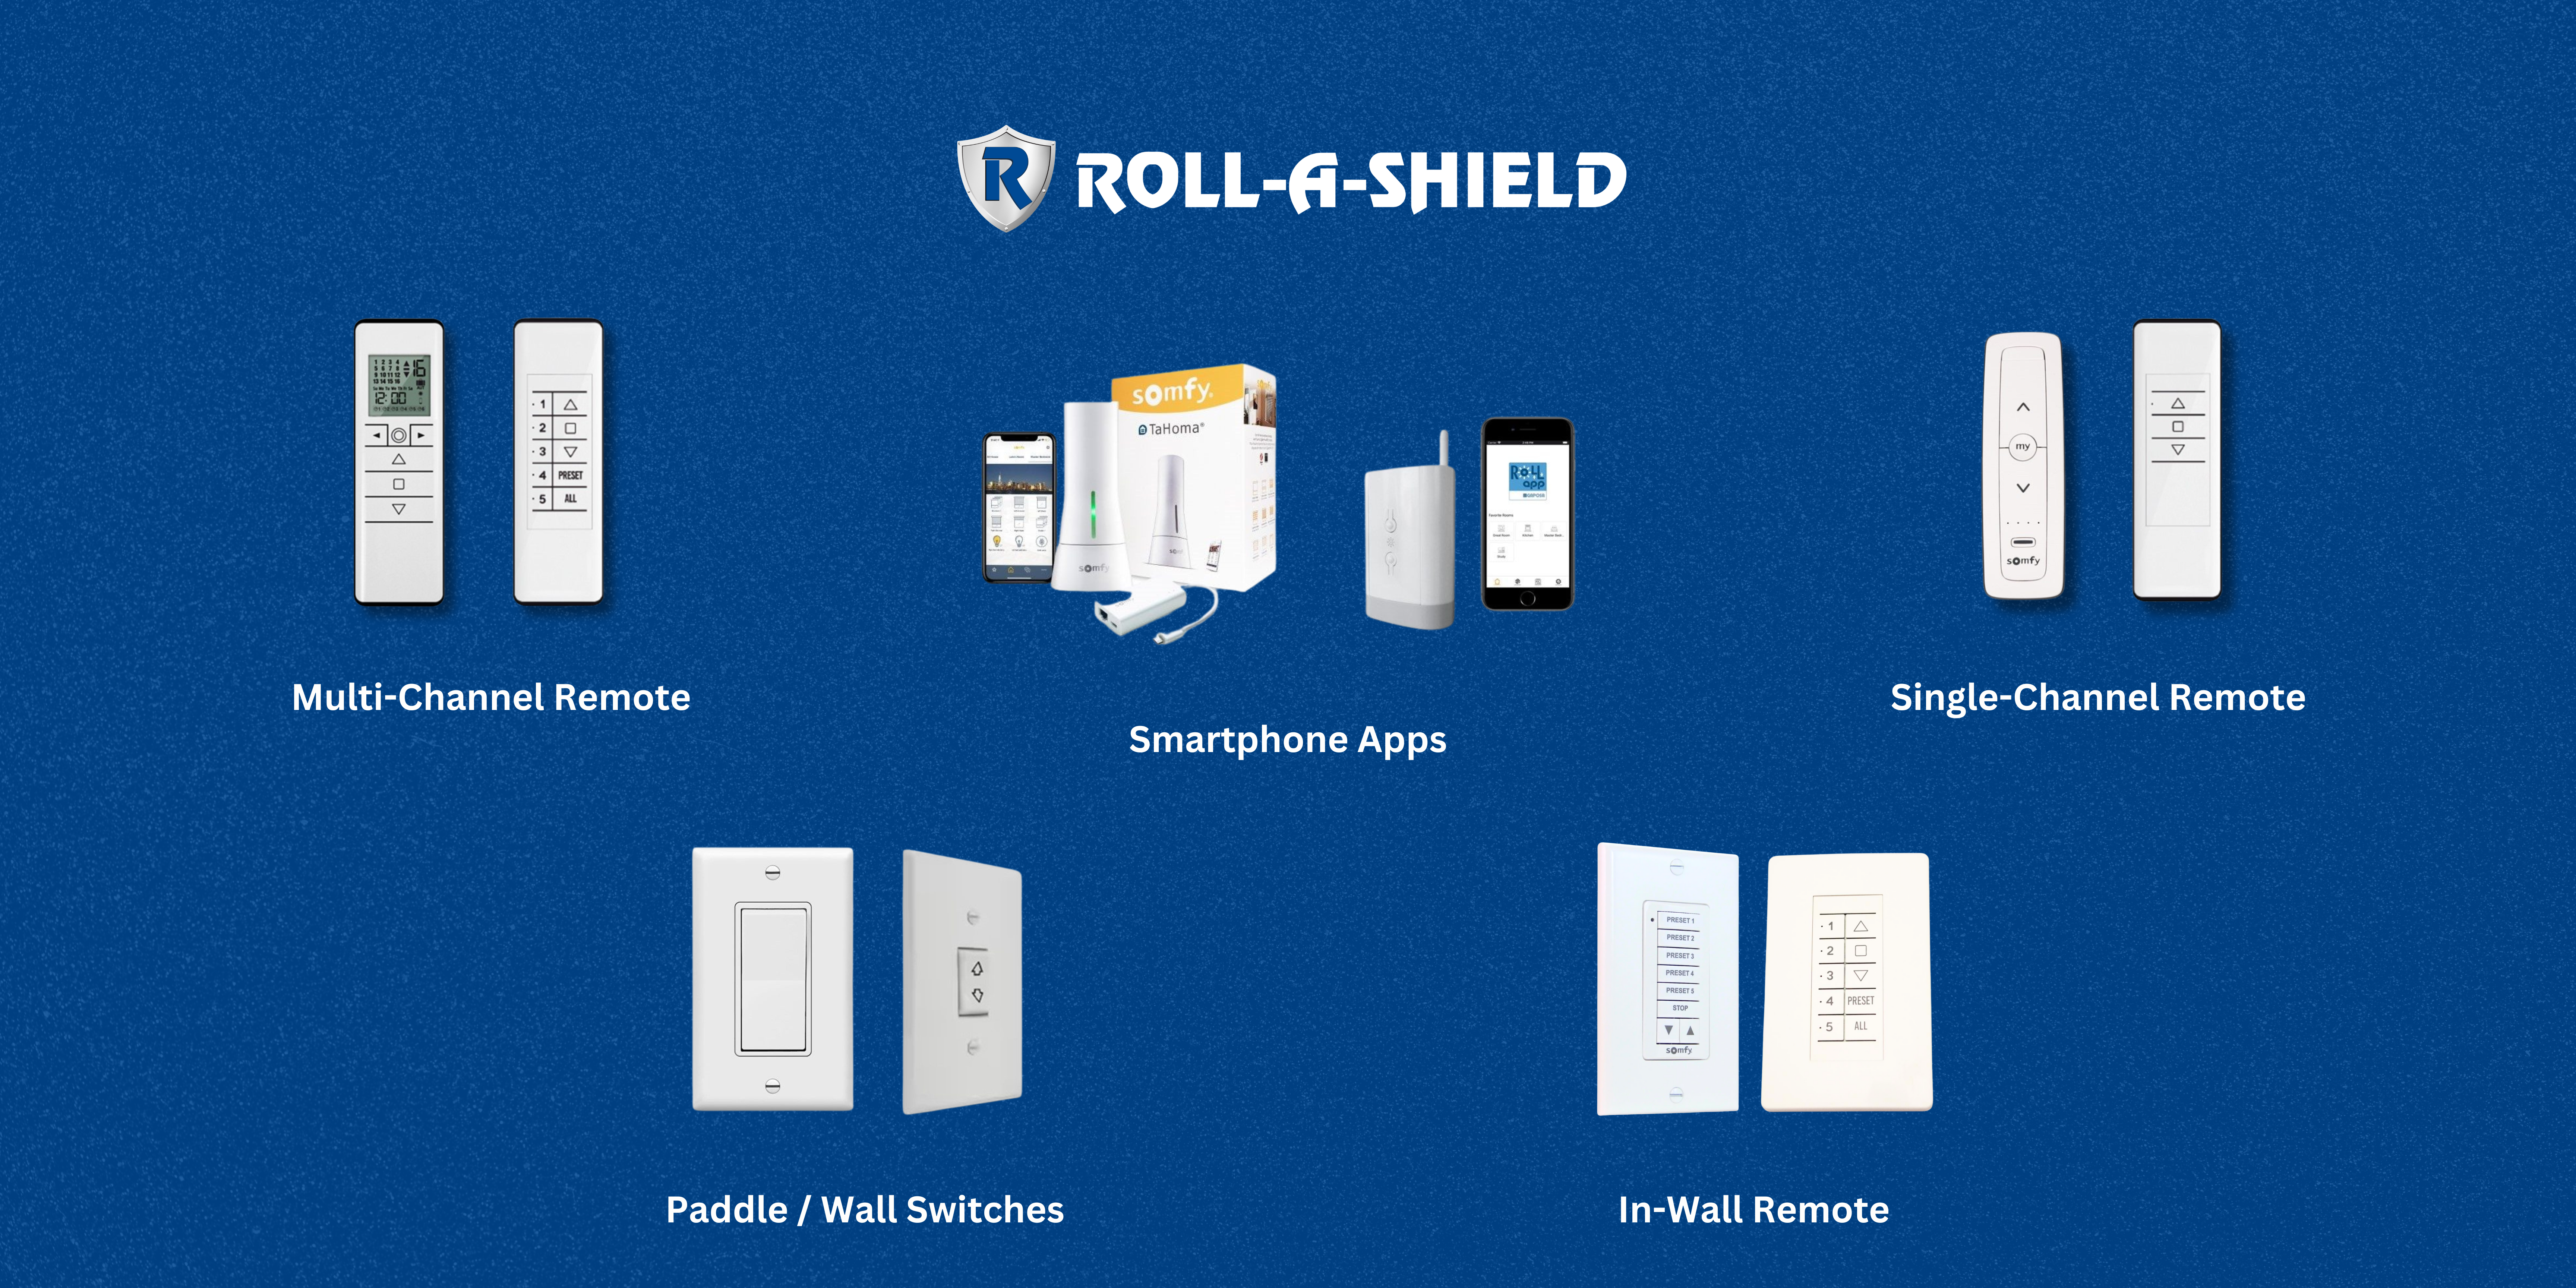 An image showing Roll-A-Shield's access options